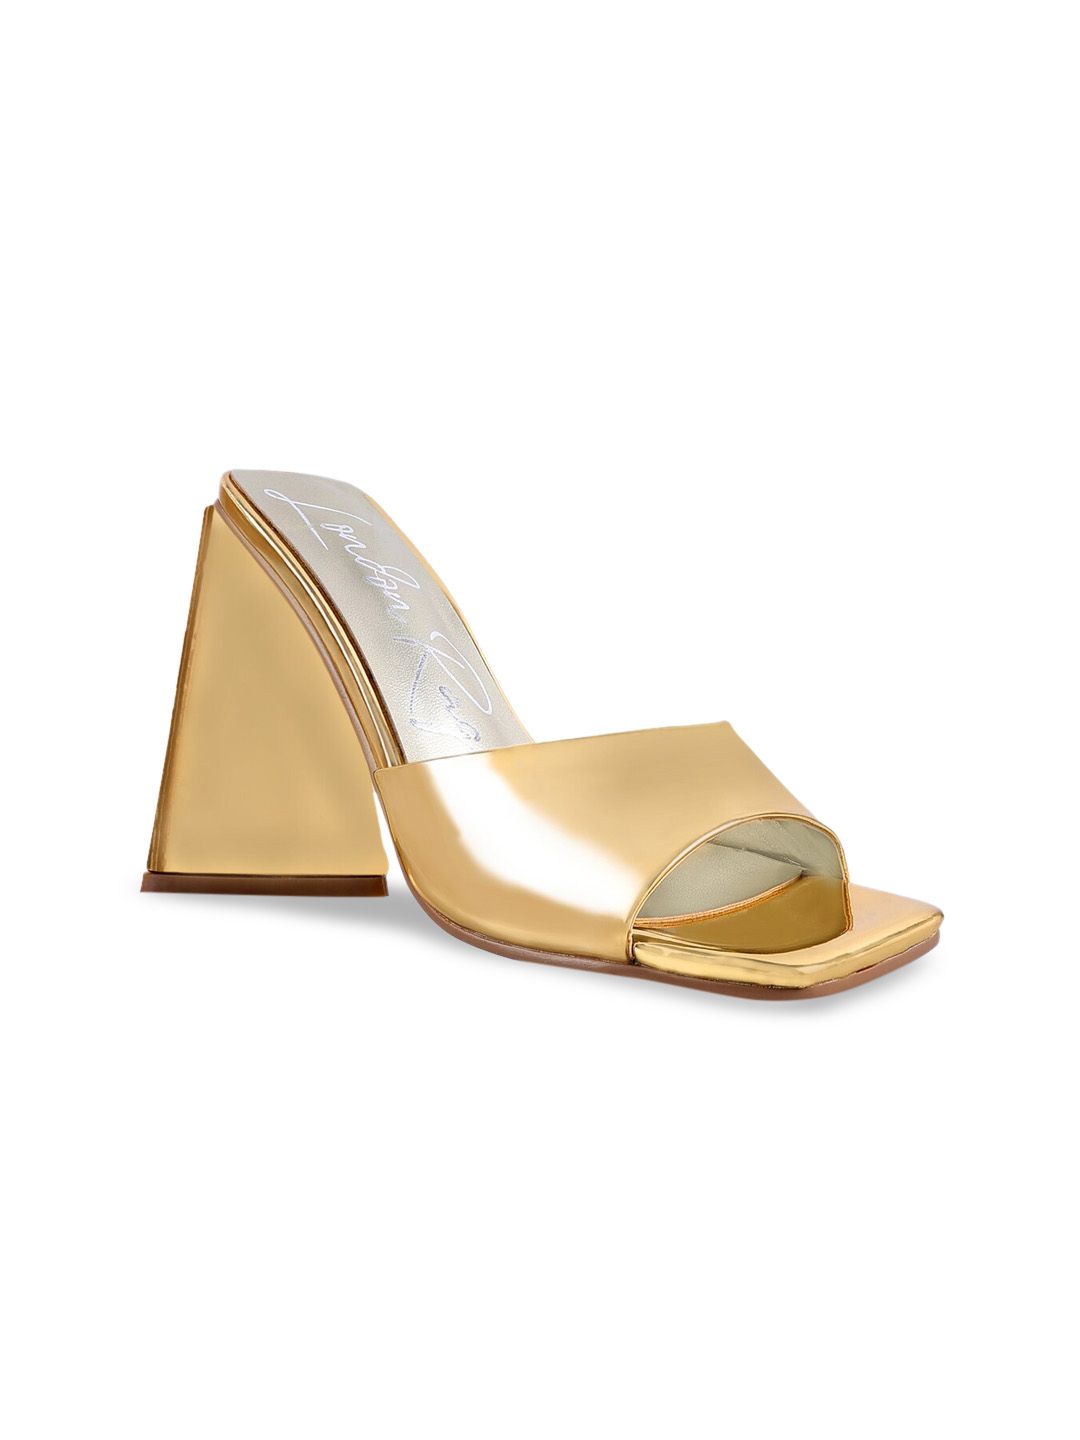 London Rag Women  Gold-Toned PU Party Block Pumps Price in India